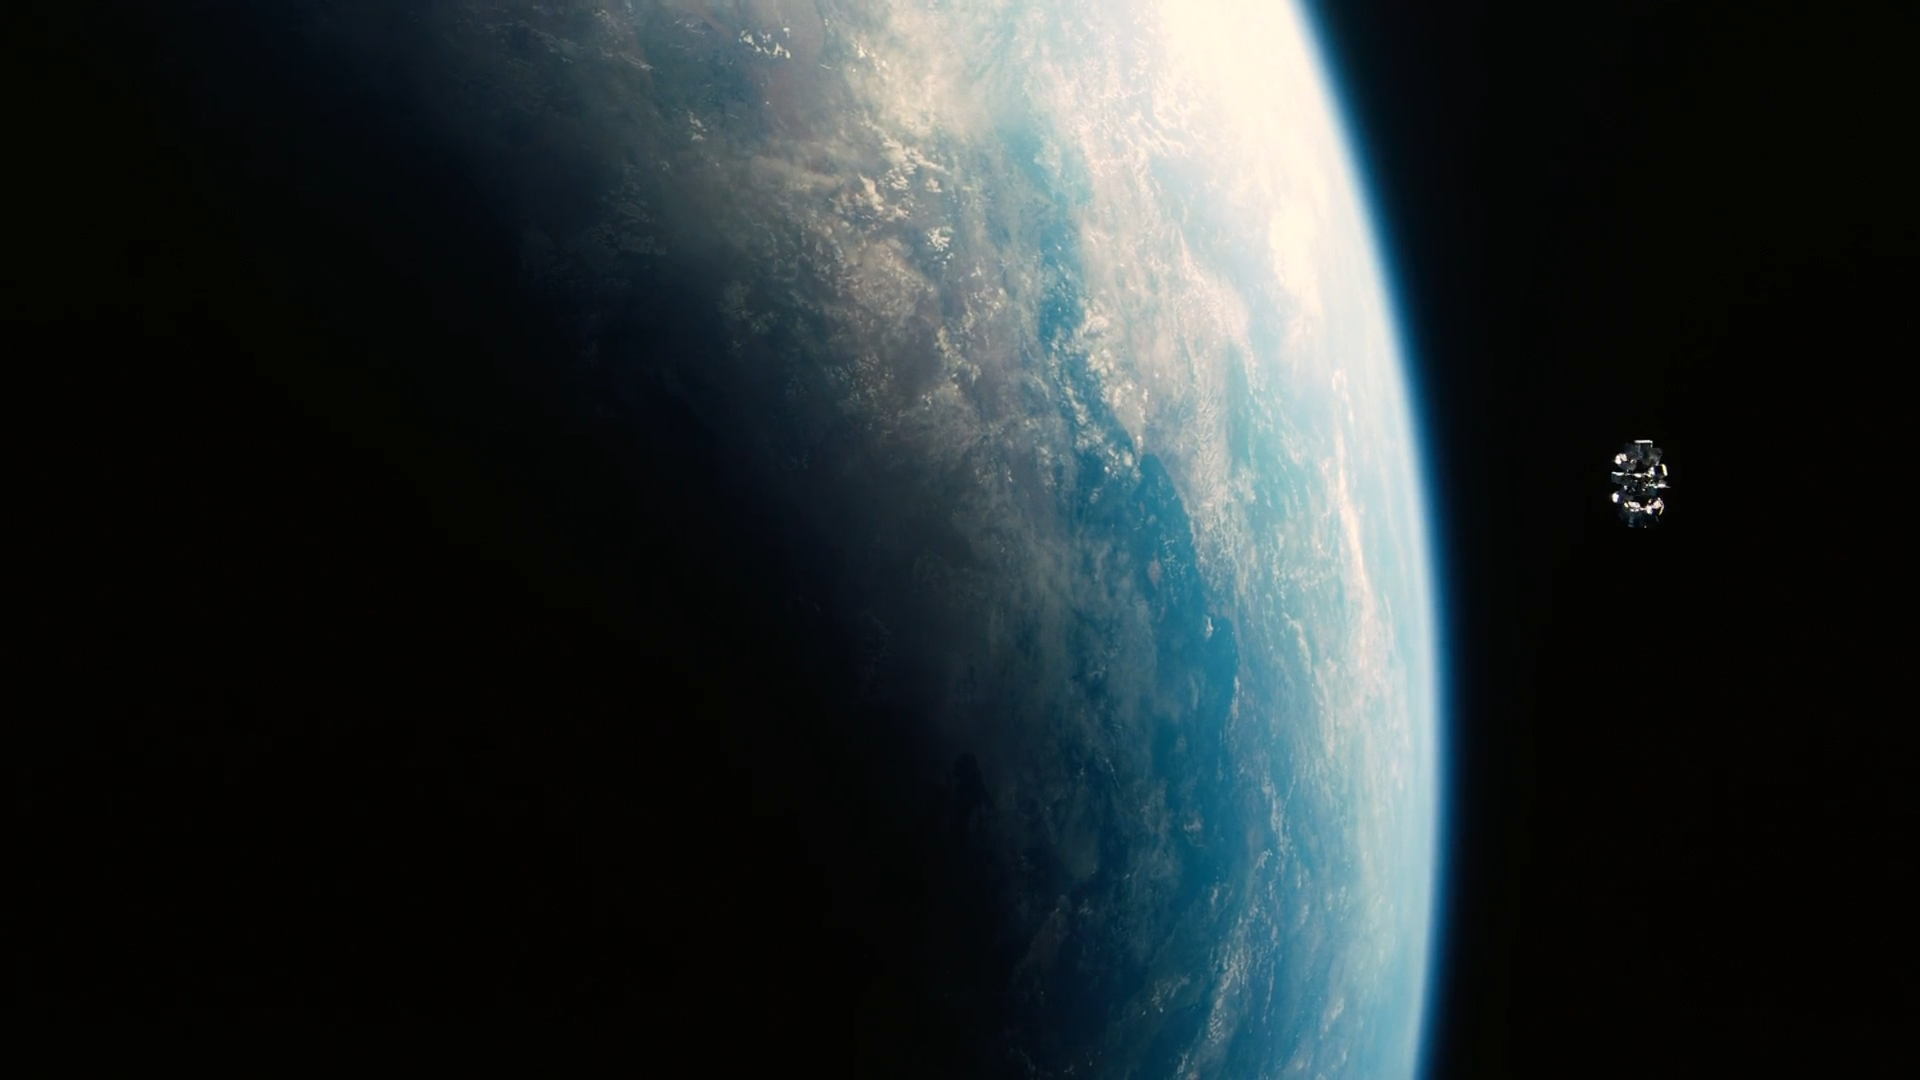 I created some INTERSTELLAR Wallpapers from 1080p screenshots